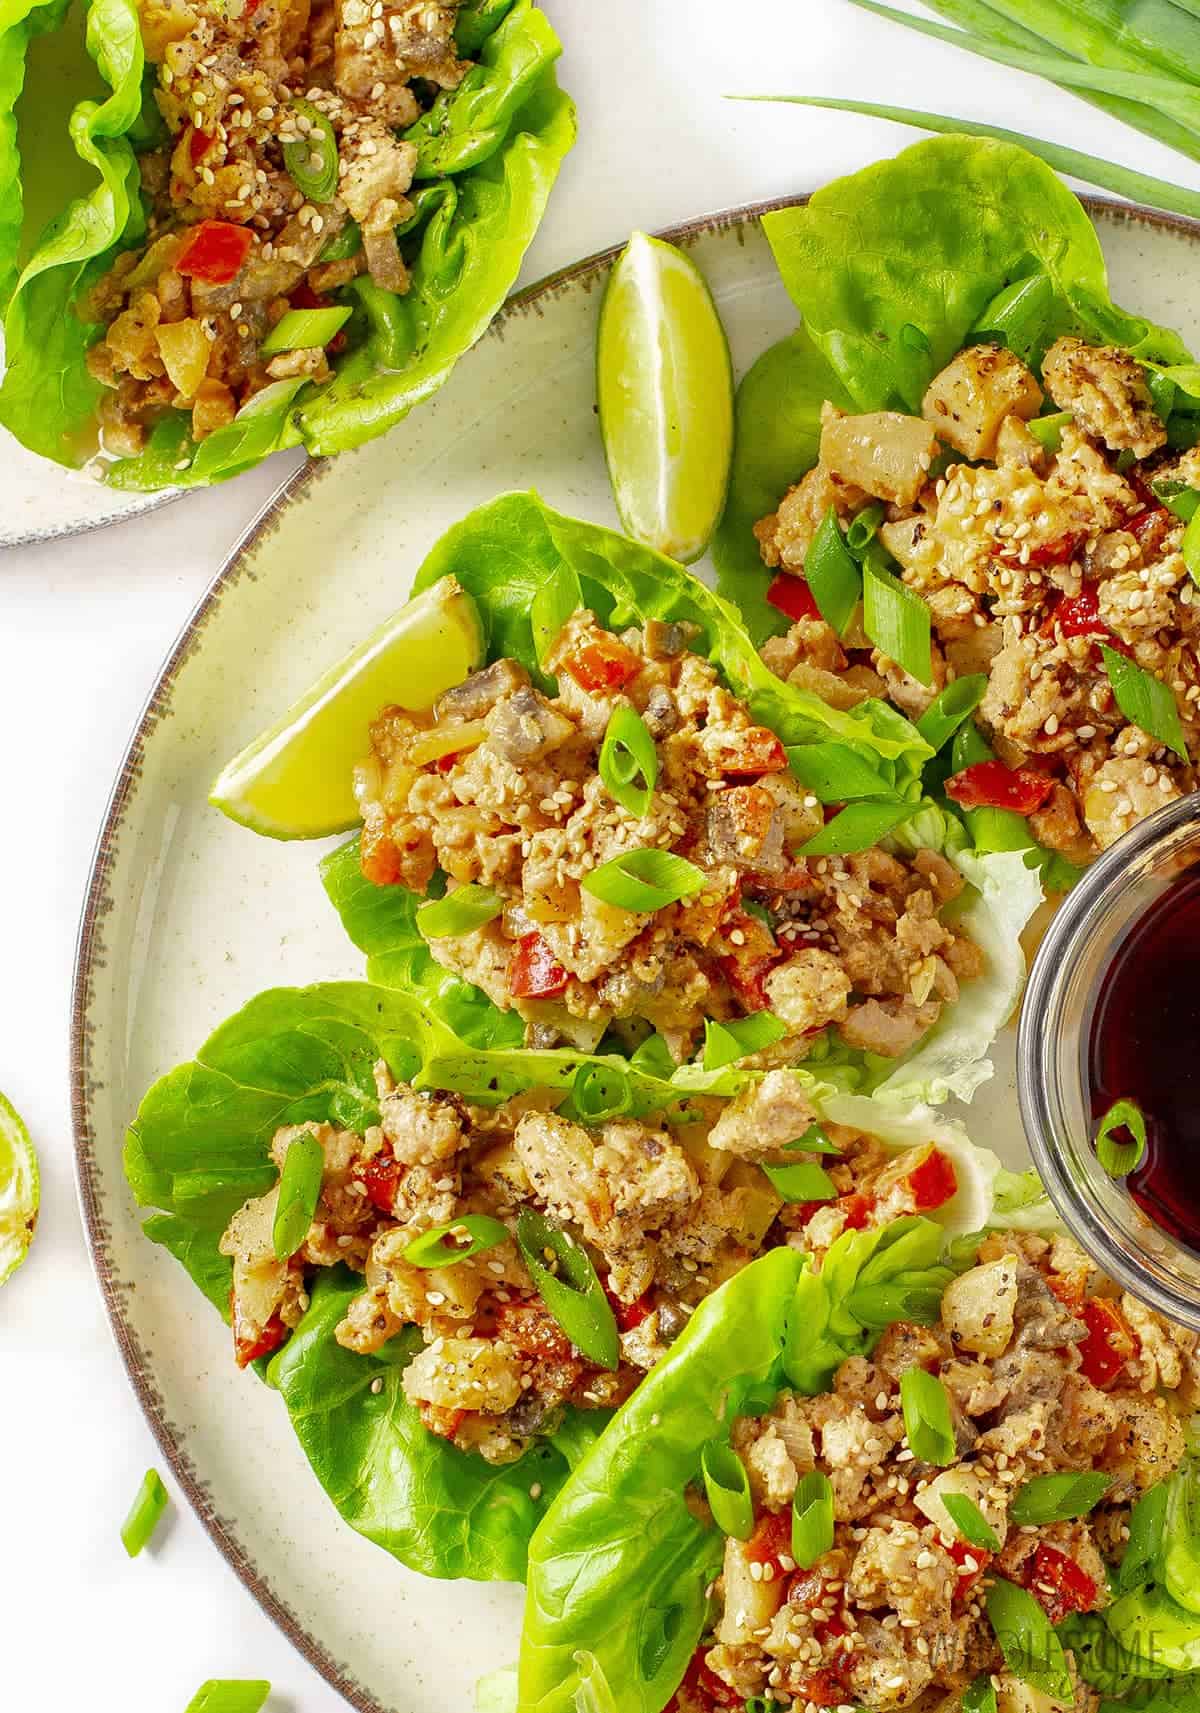 Plate with chicken lettuce wraps.